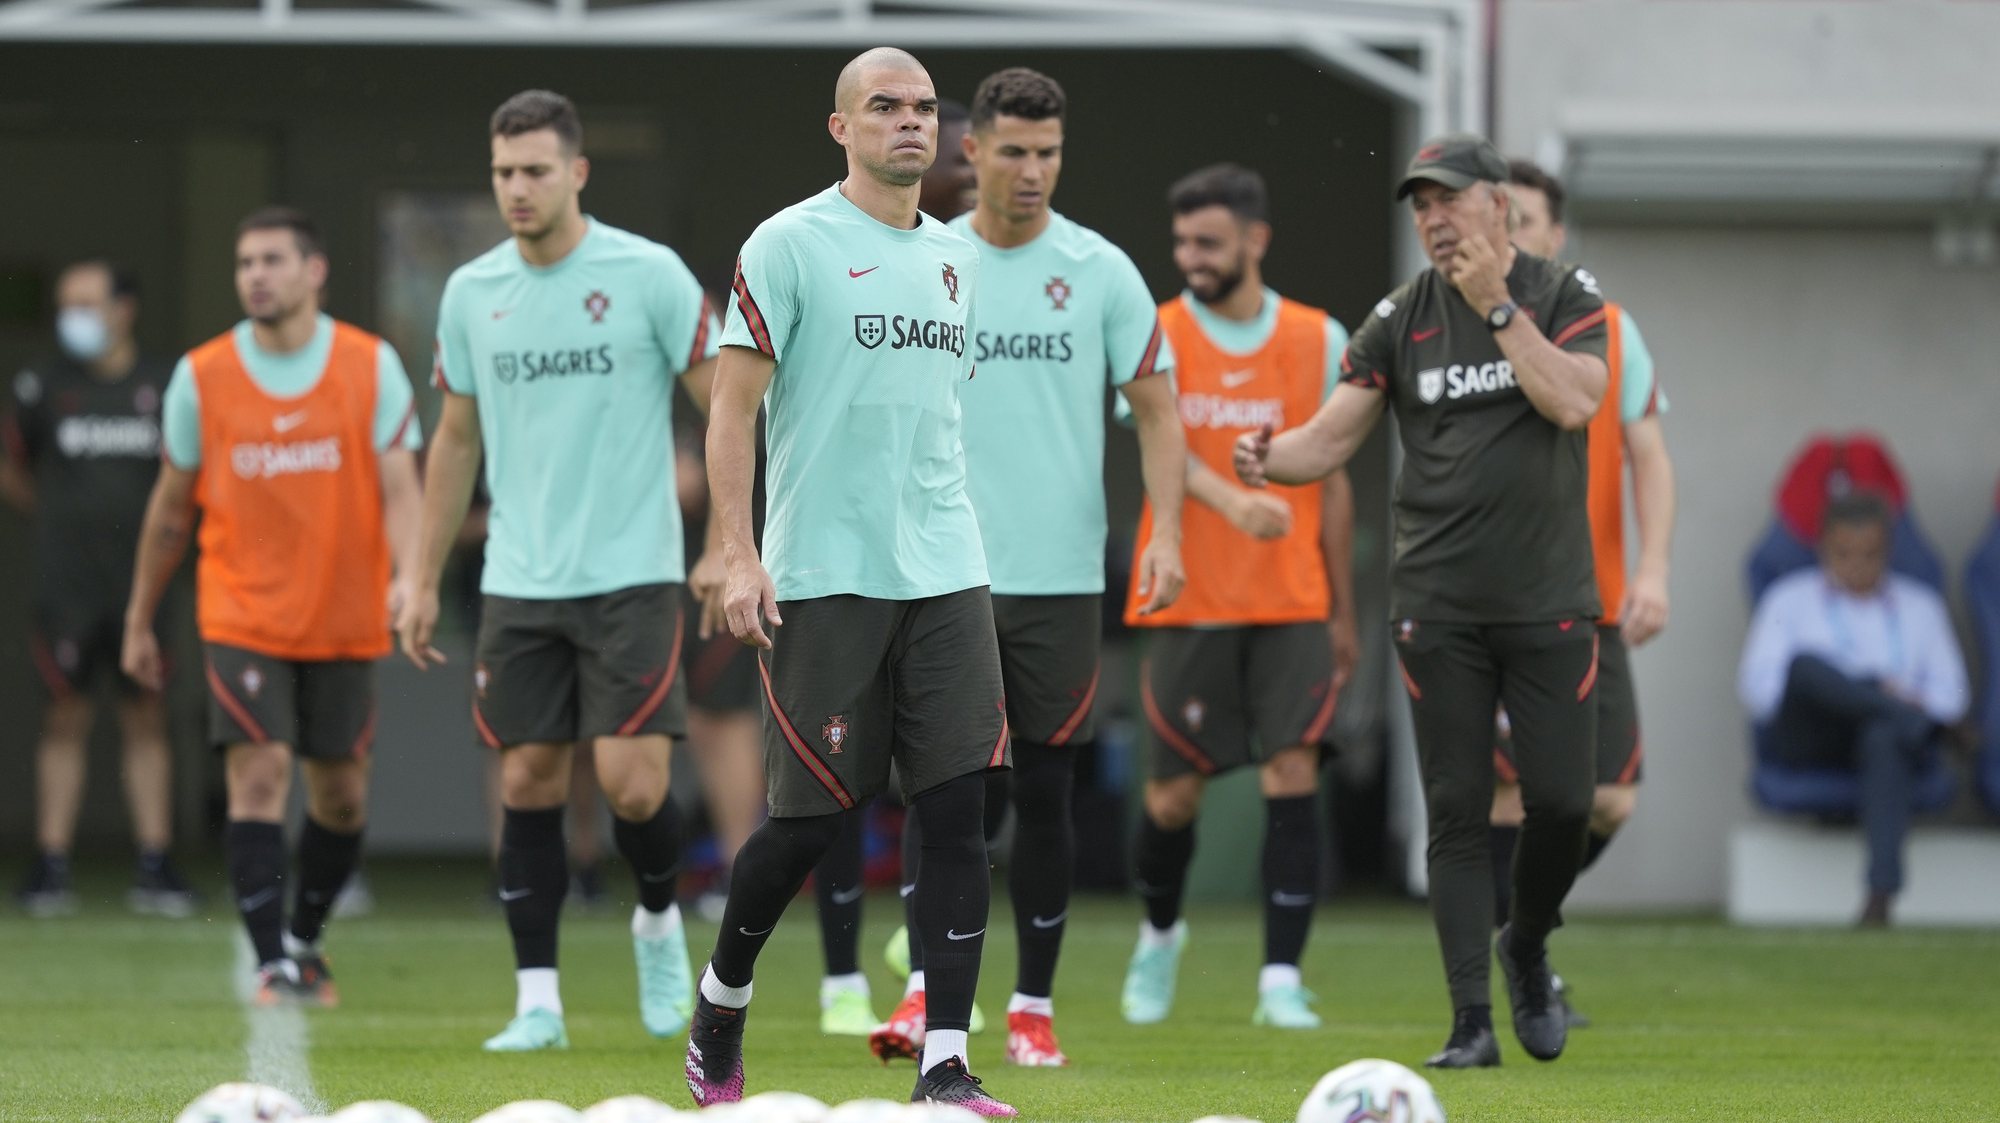 Portugal´s national soccer team players Pepe during a training session at the Illovszky Rudolf Stadium, Hungay, 21 June 2021. Portugal will face France in their UEFA EURO 2020 group F round soccer match on 23 June 2021. HUGO DELGADO/LUSA